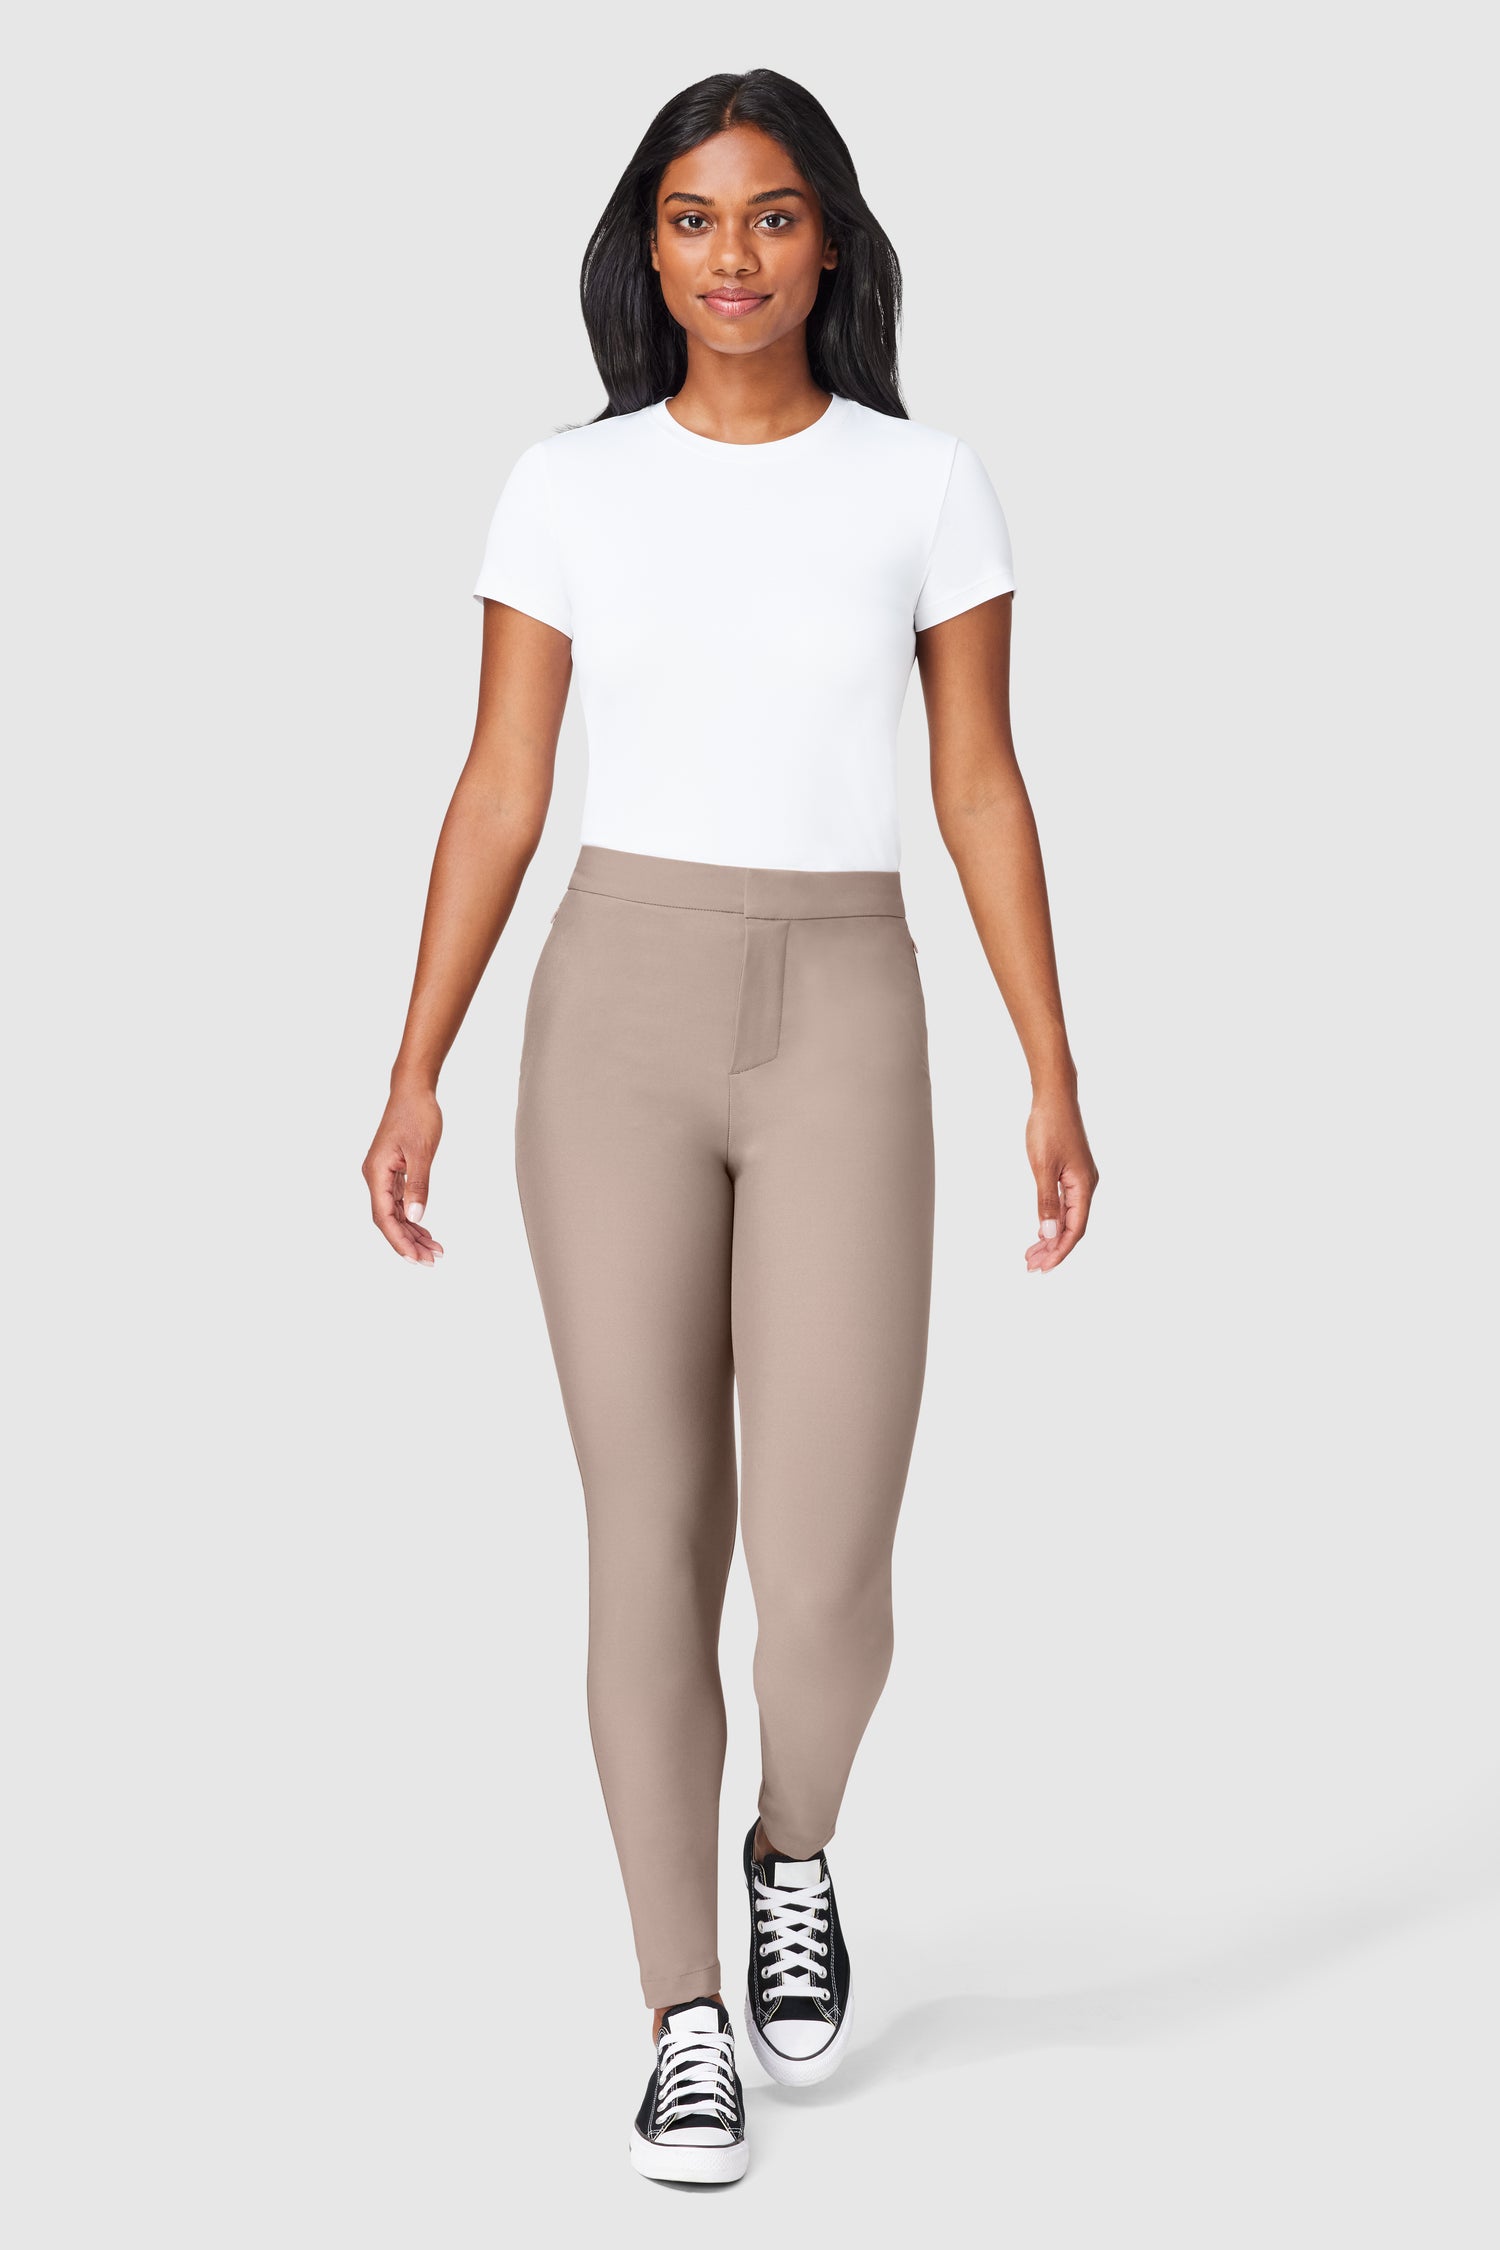 Friday FWD Women's Travel Stretch Tapered Pant - FRIDAYFWD